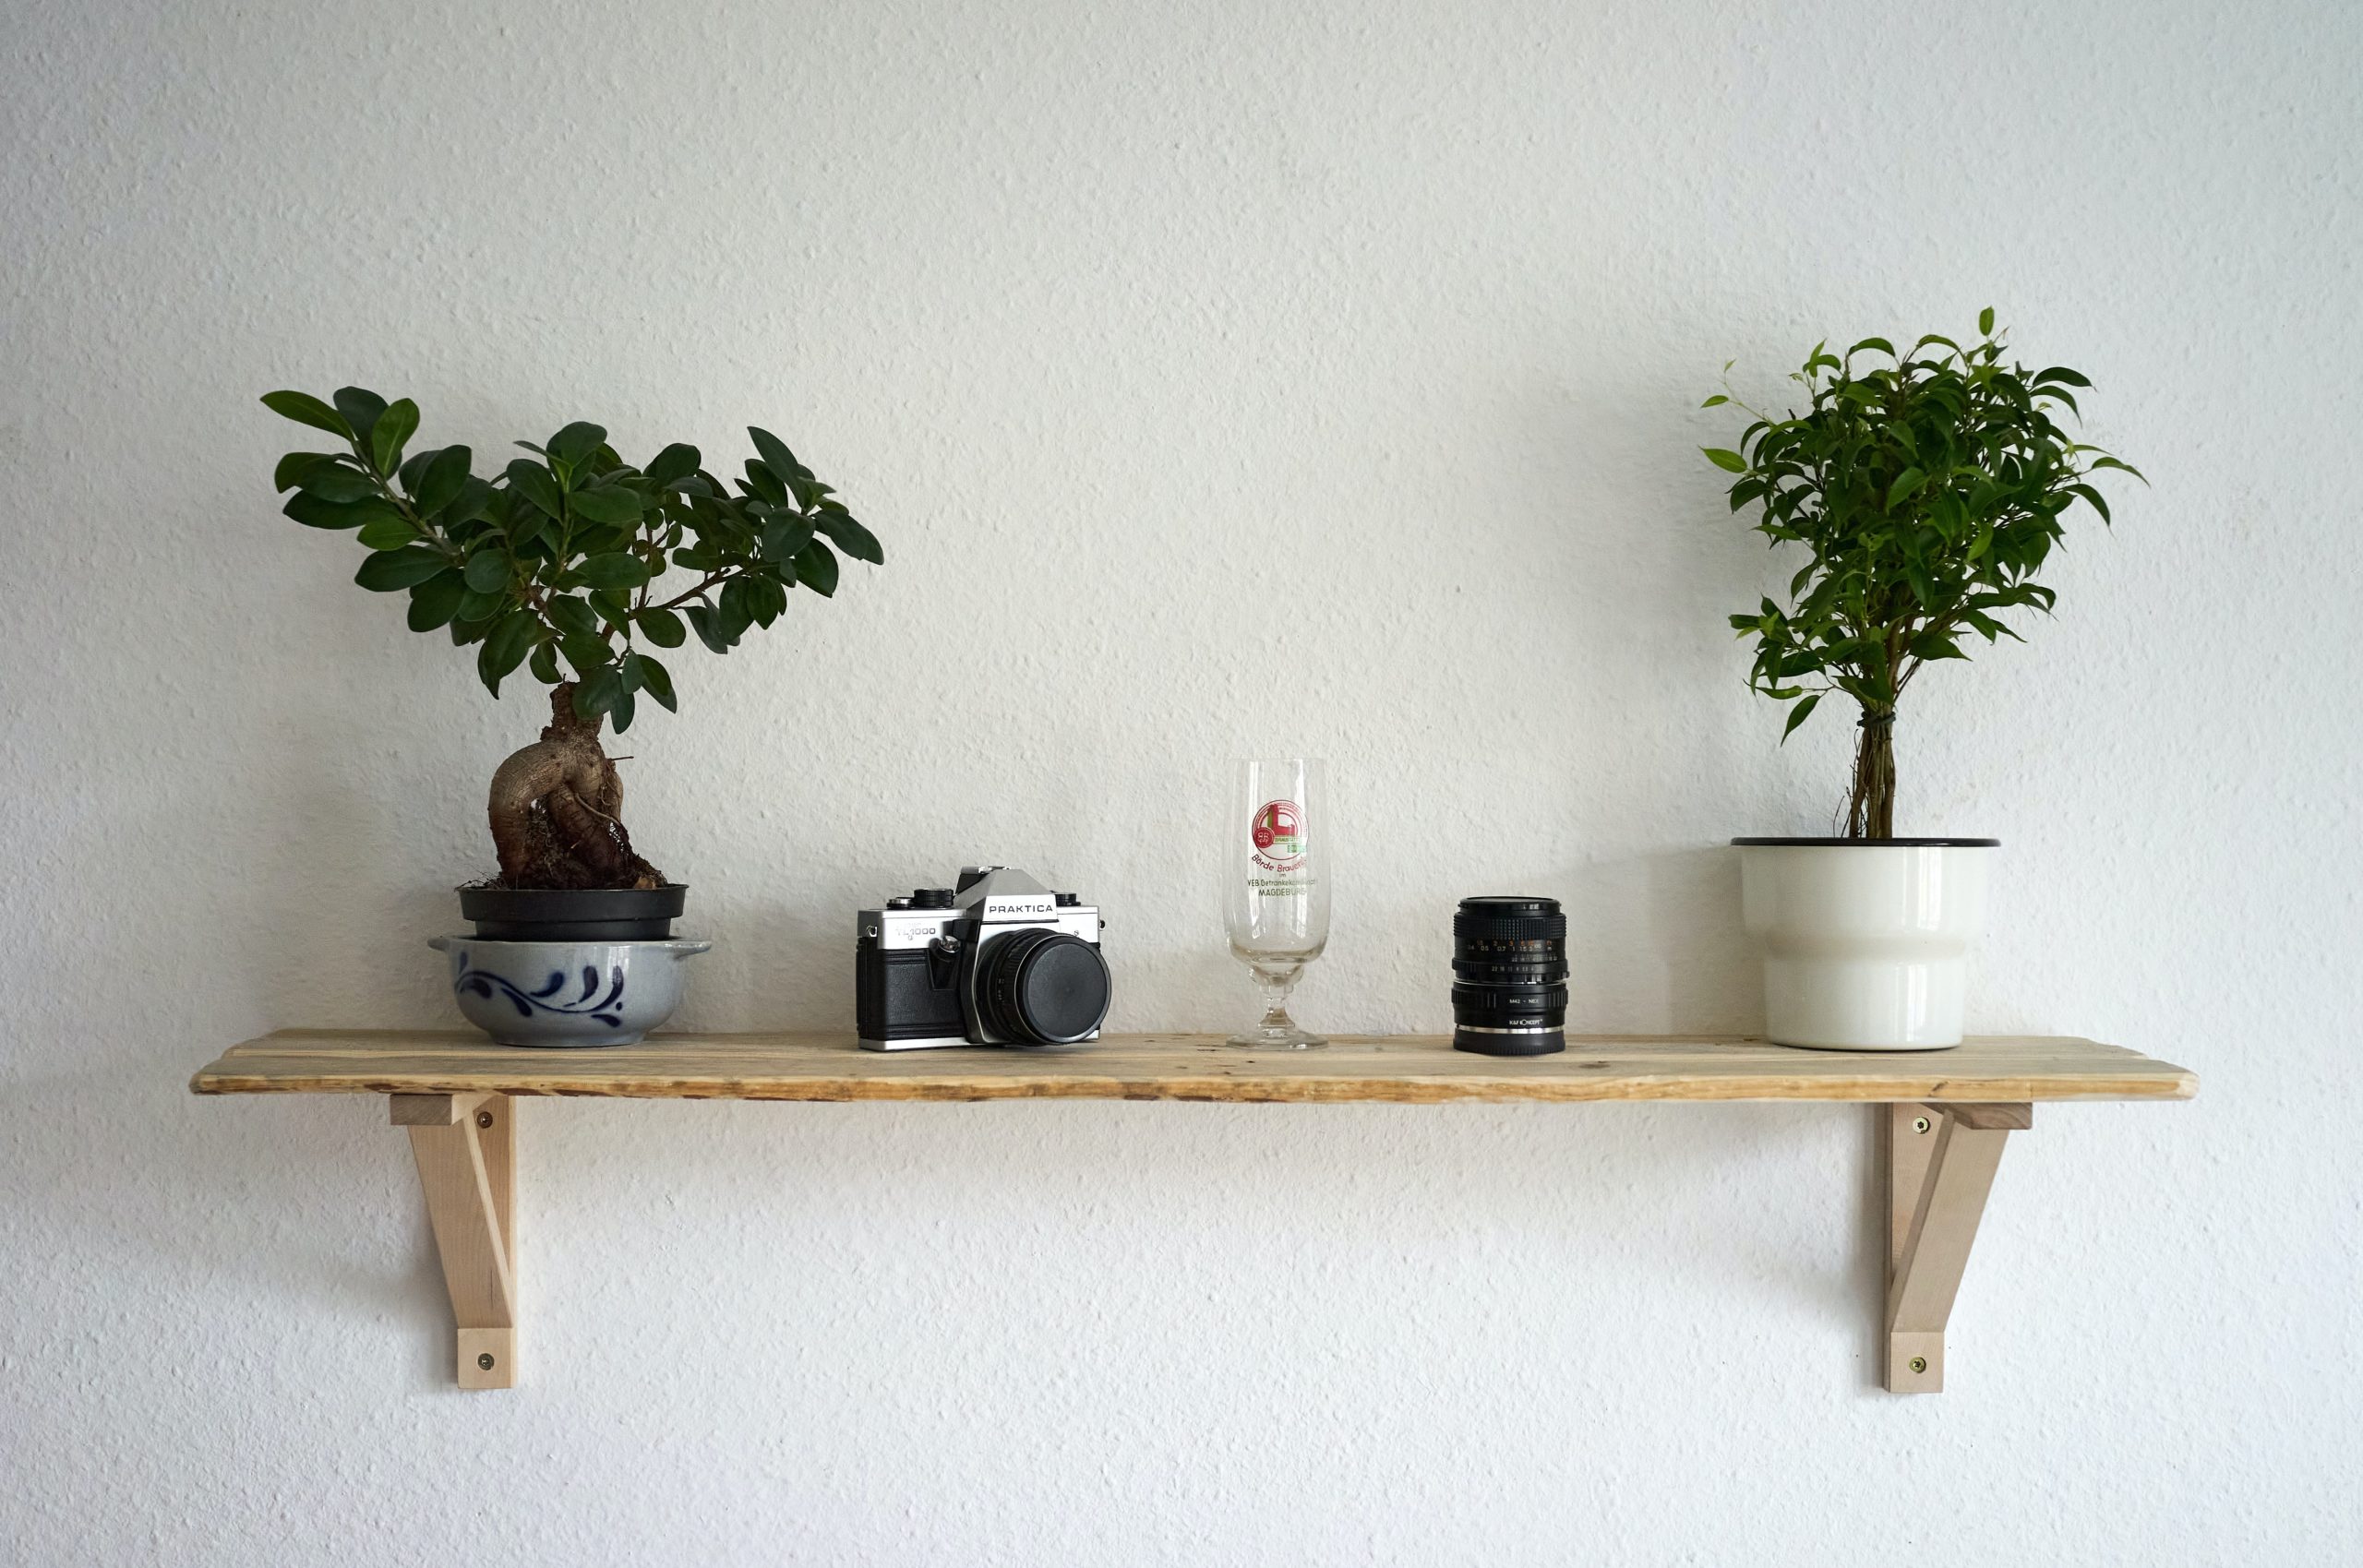 Wall shelf with decorations